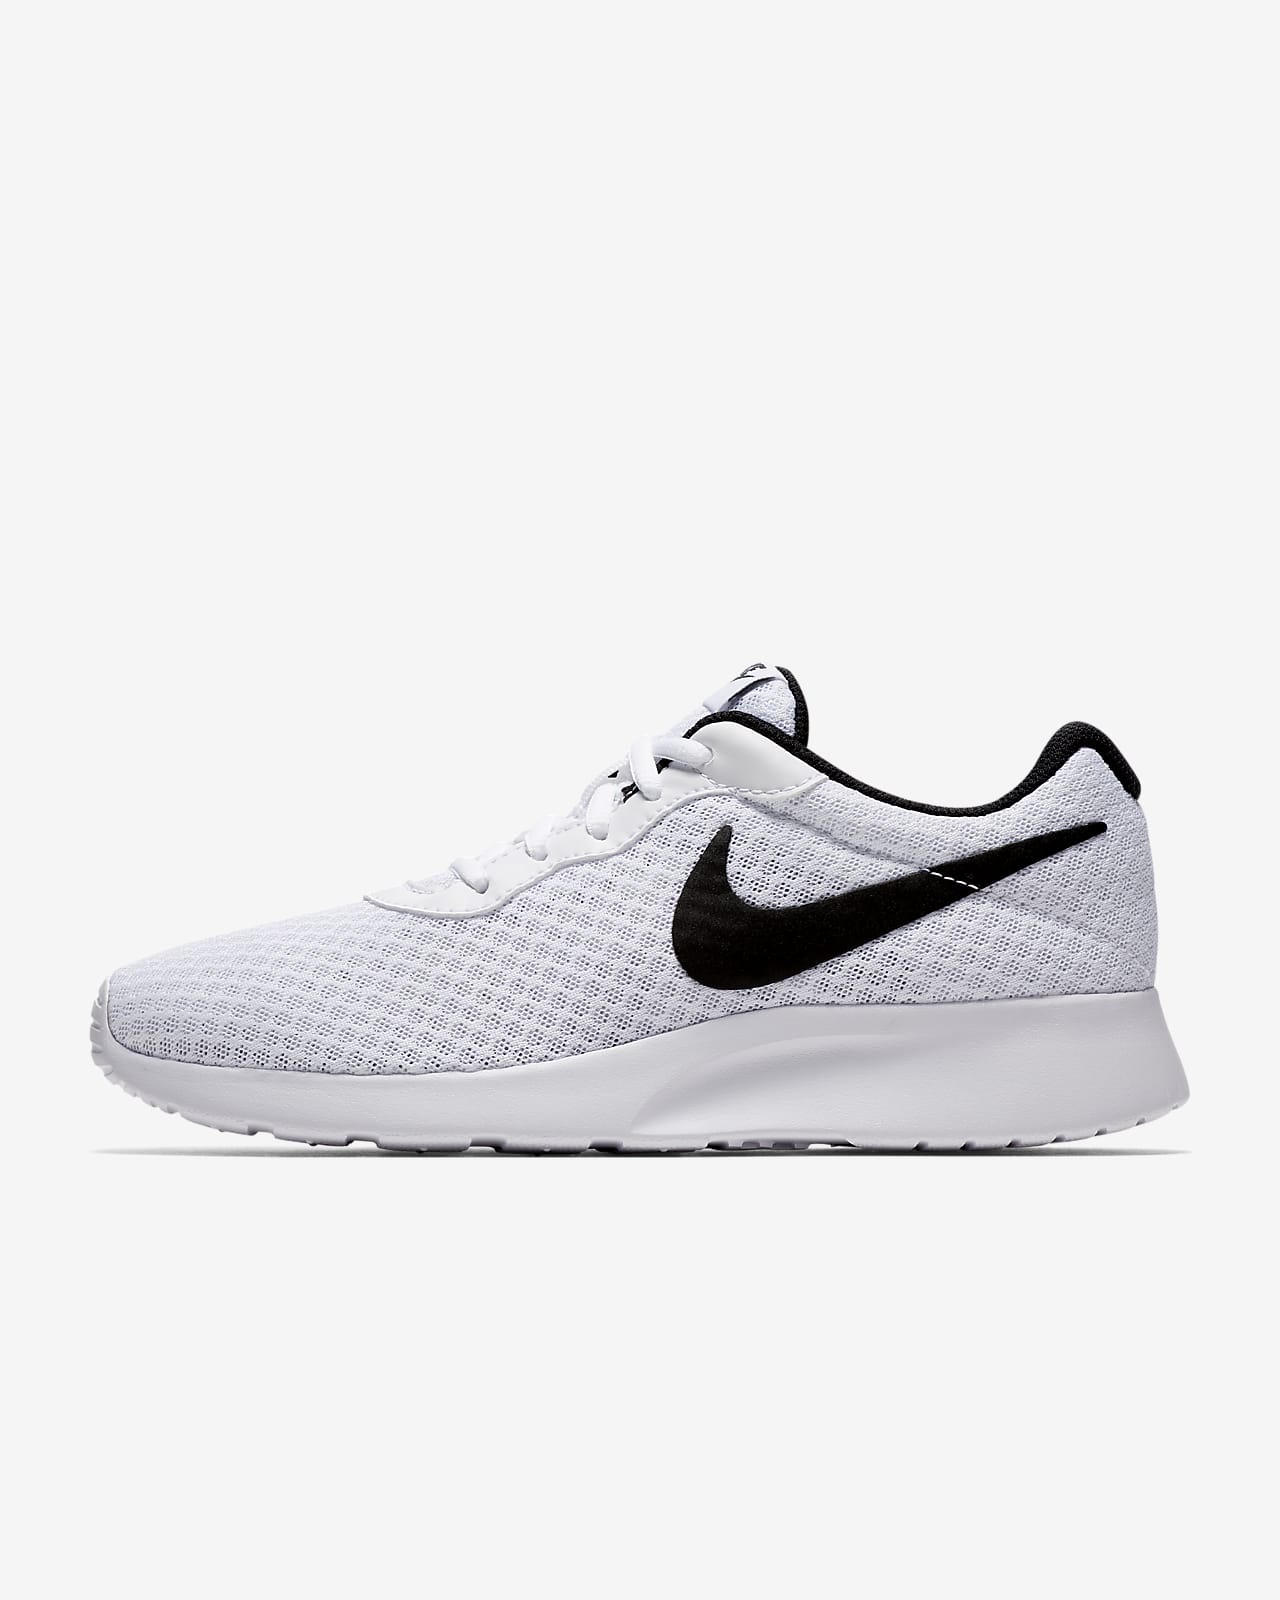 white and black shoes nike